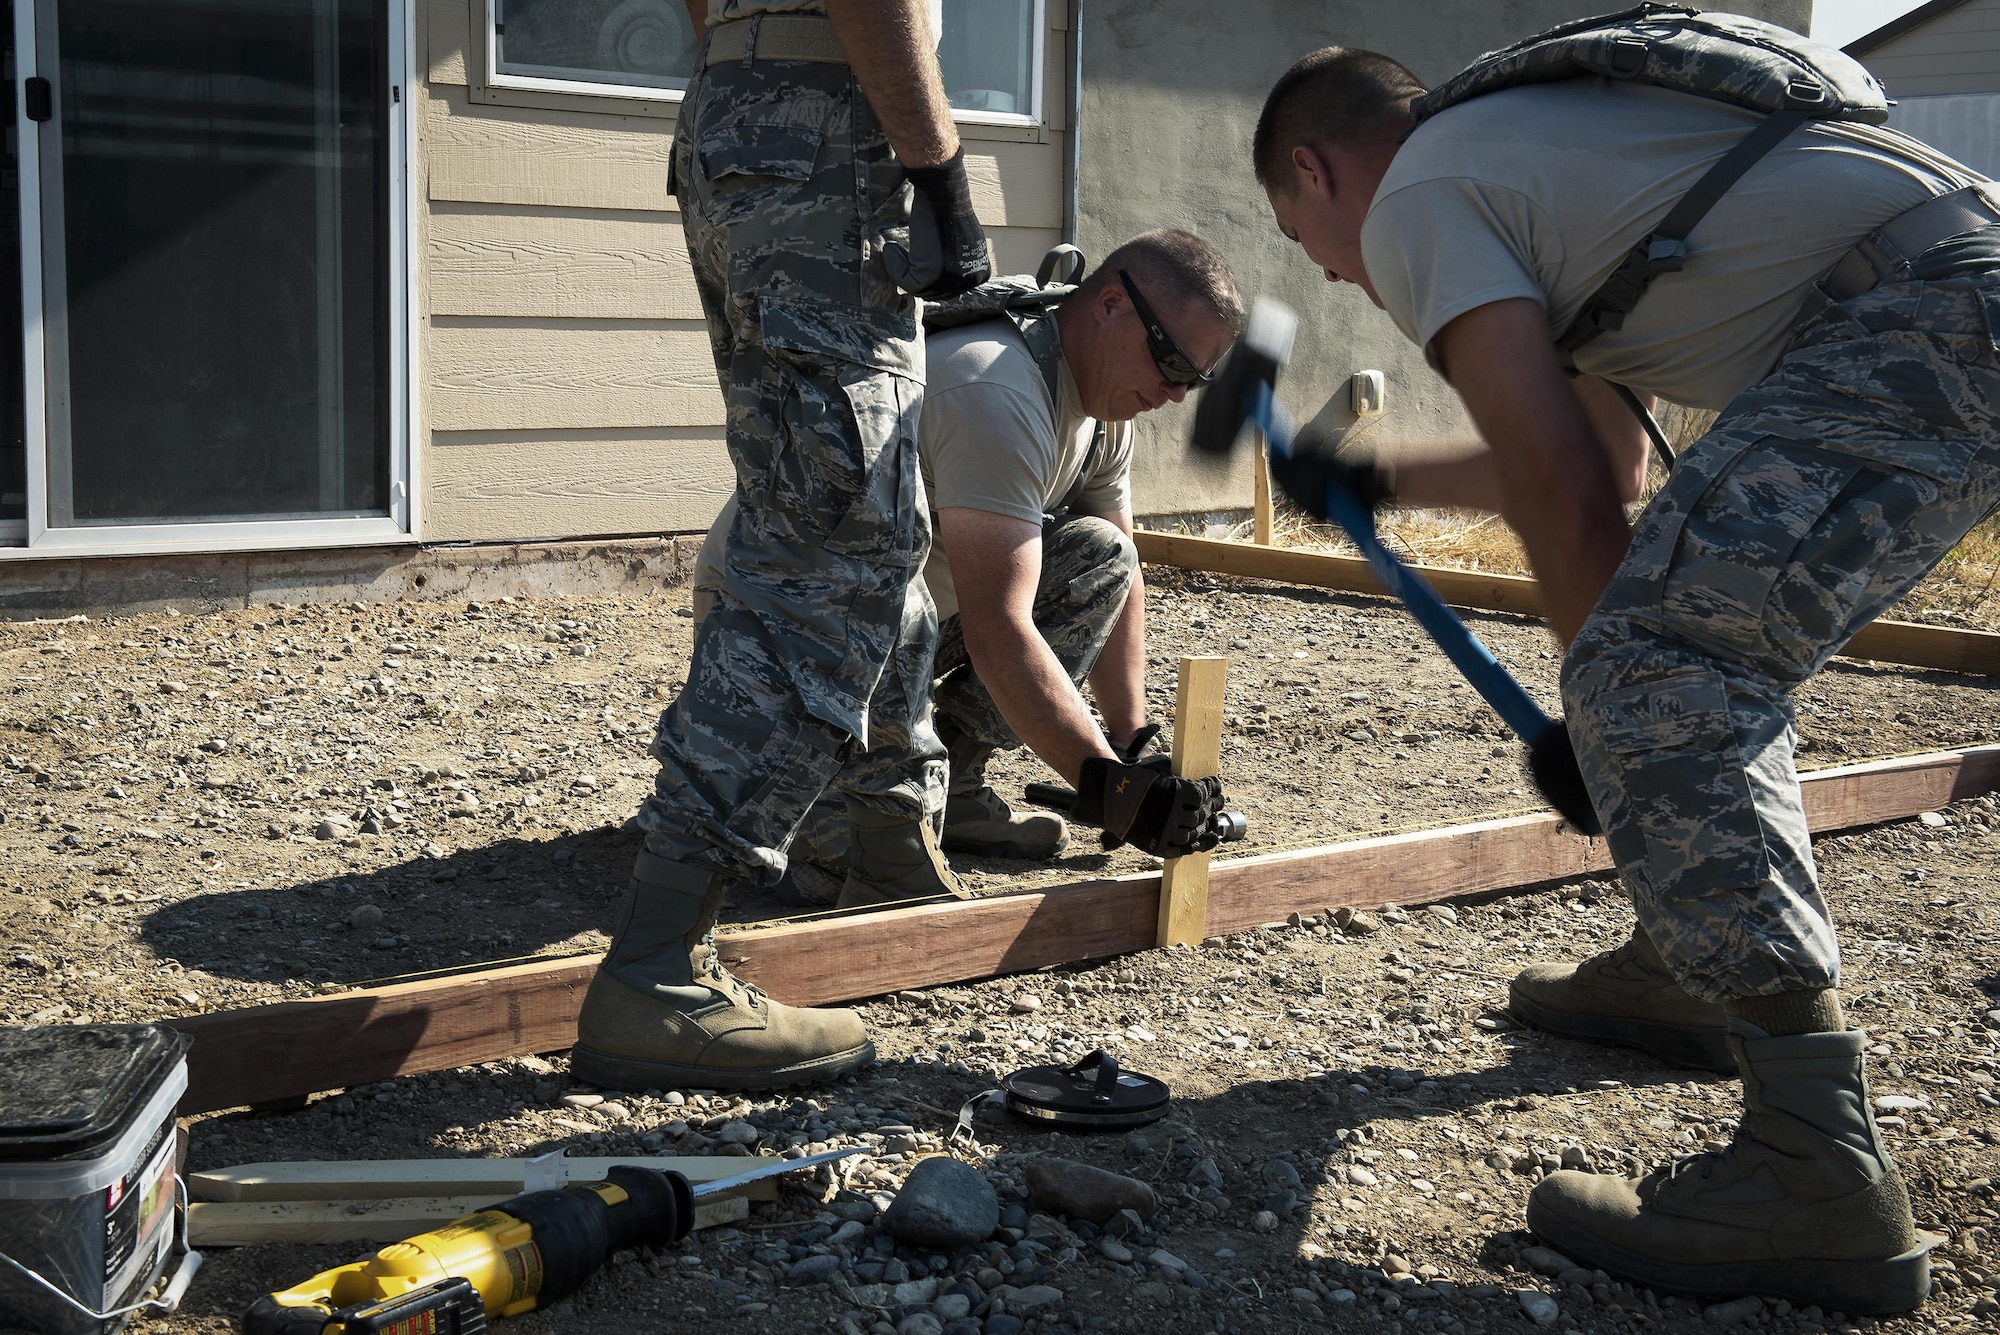 Pavement and construction equipment specialists with the 182nd Civil Engineer Squadron, Illinois Air National Guard, build a concrete form during annual training in Crow Agency, Mont., July 24, 2017. The squadron helped build homes for Native American veterans as part of the Department of Defense’s Innovative Readiness Training civil-military relations program. (U.S. Air National Guard photo by Tech. Sgt. Lealan Buehrer)